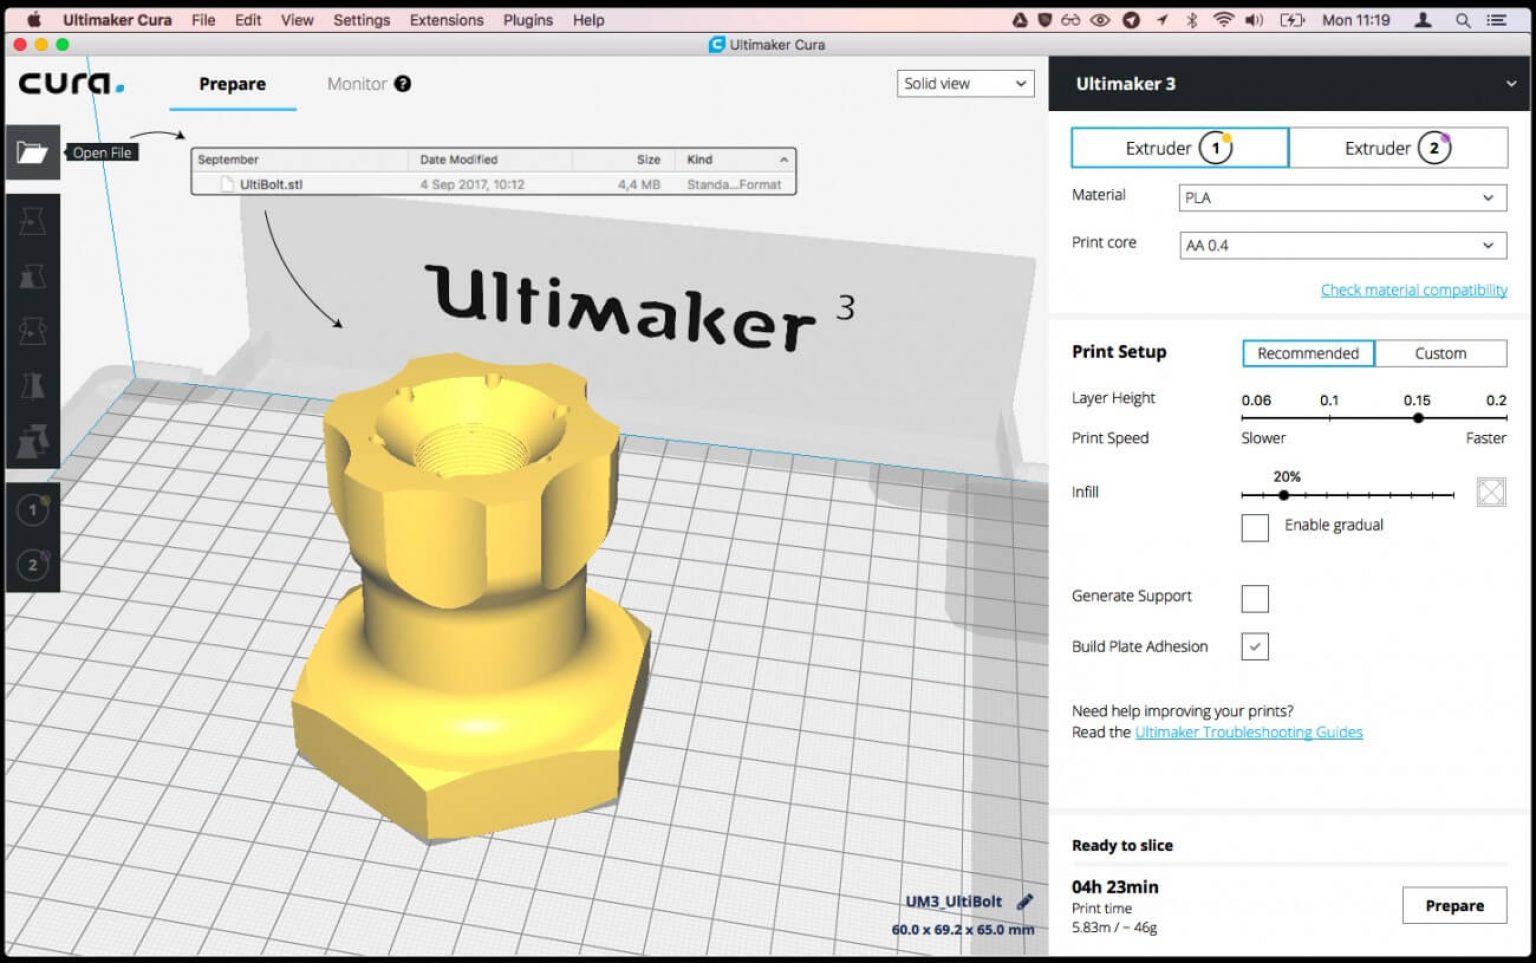 Ultimaker 3 Extended 3D Printer In-Depth Review - Ultimaker%E2%80%99s Cura Software 1536x963